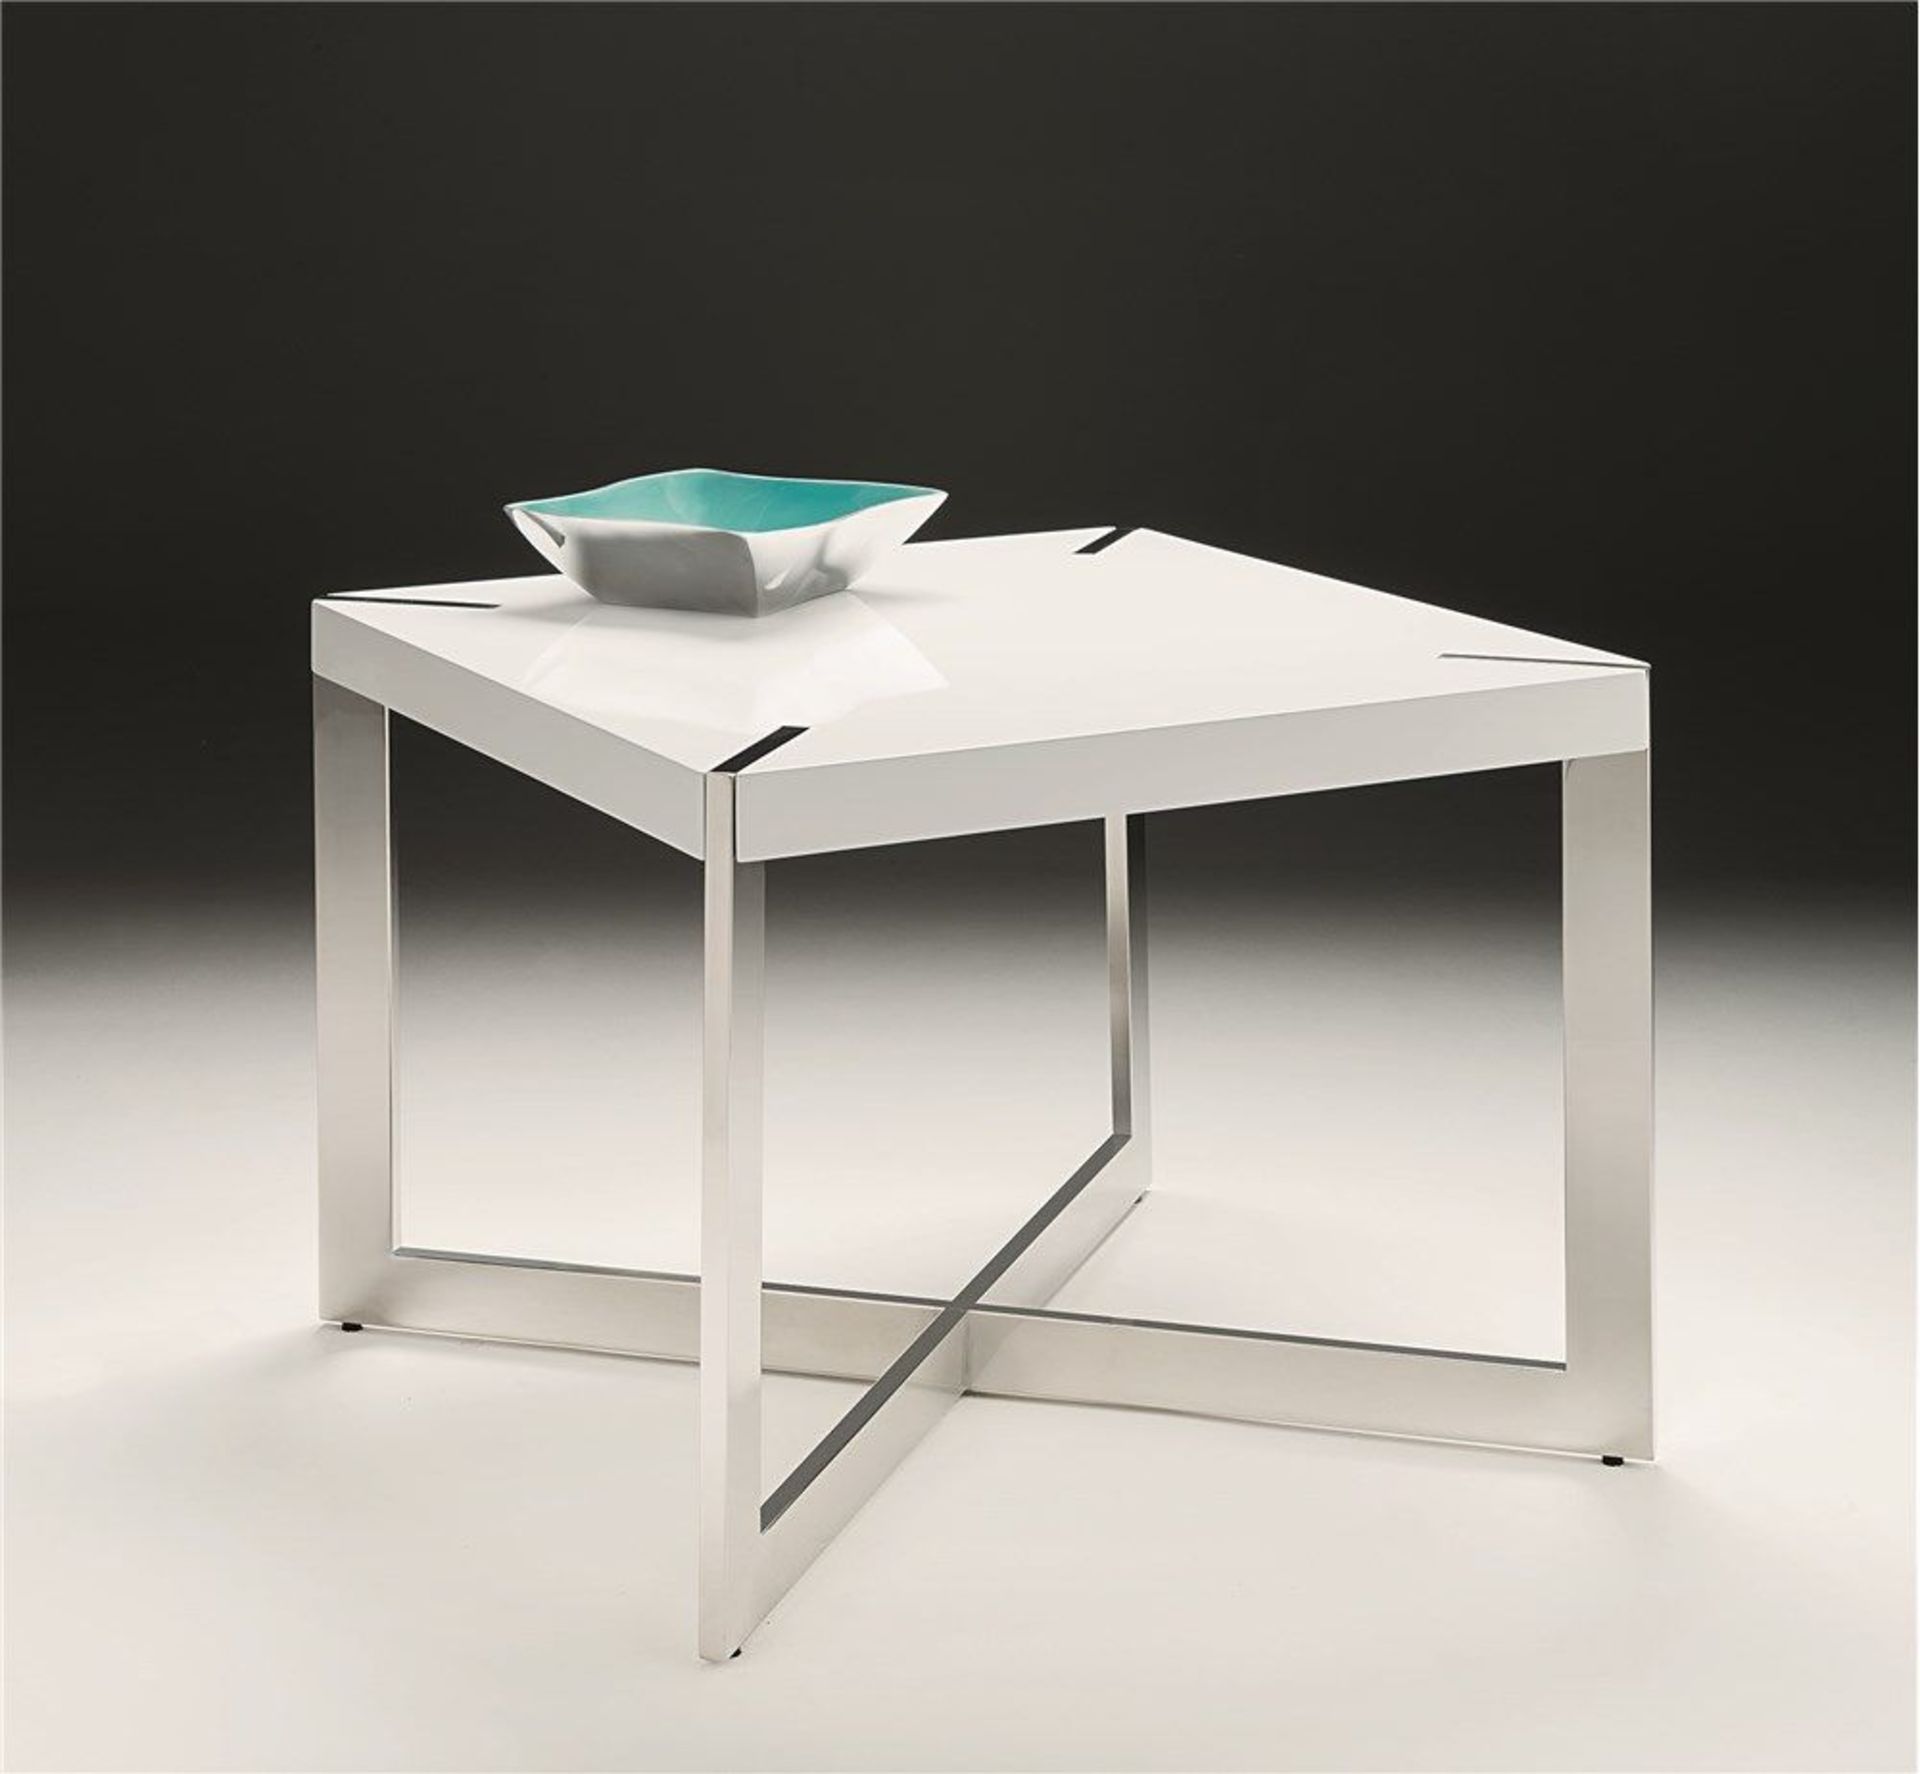 1 x Designer Chelsom BRERA Lamp Table - CL081 - Artic White Gloss Top With Stainless Steel Base -